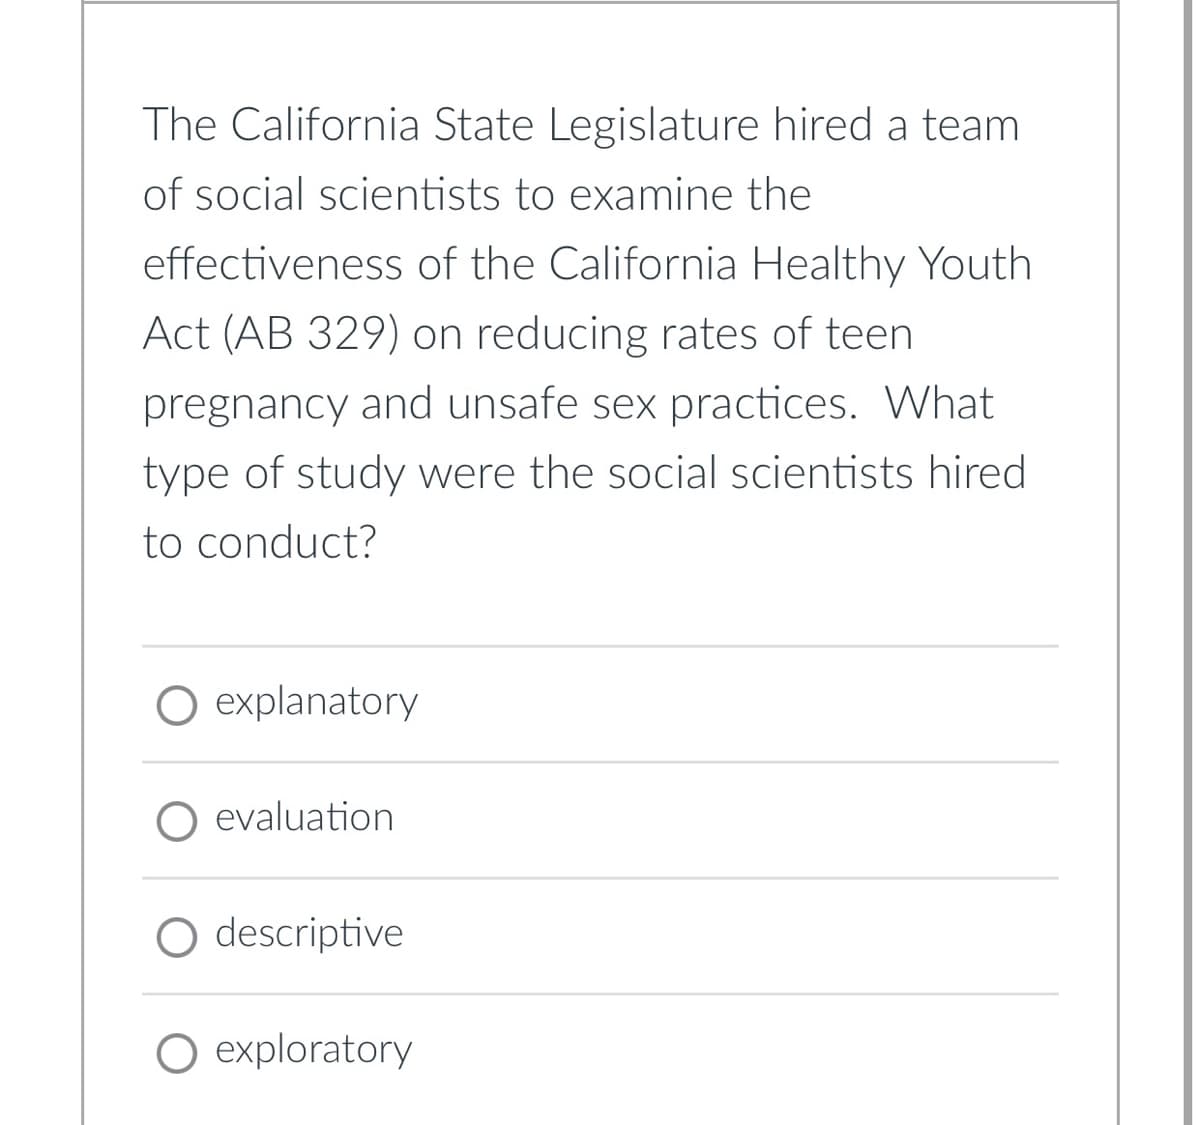 The California State Legislature hired a team
of social scientists to examine the
effectiveness of the California Healthy Youth
Act (AB 329) on reducing rates of teen
pregnancy and unsafe sex practices. What
type of study were the social scientists hired
to conduct?
explanatory
O evaluation
descriptive
exploratory